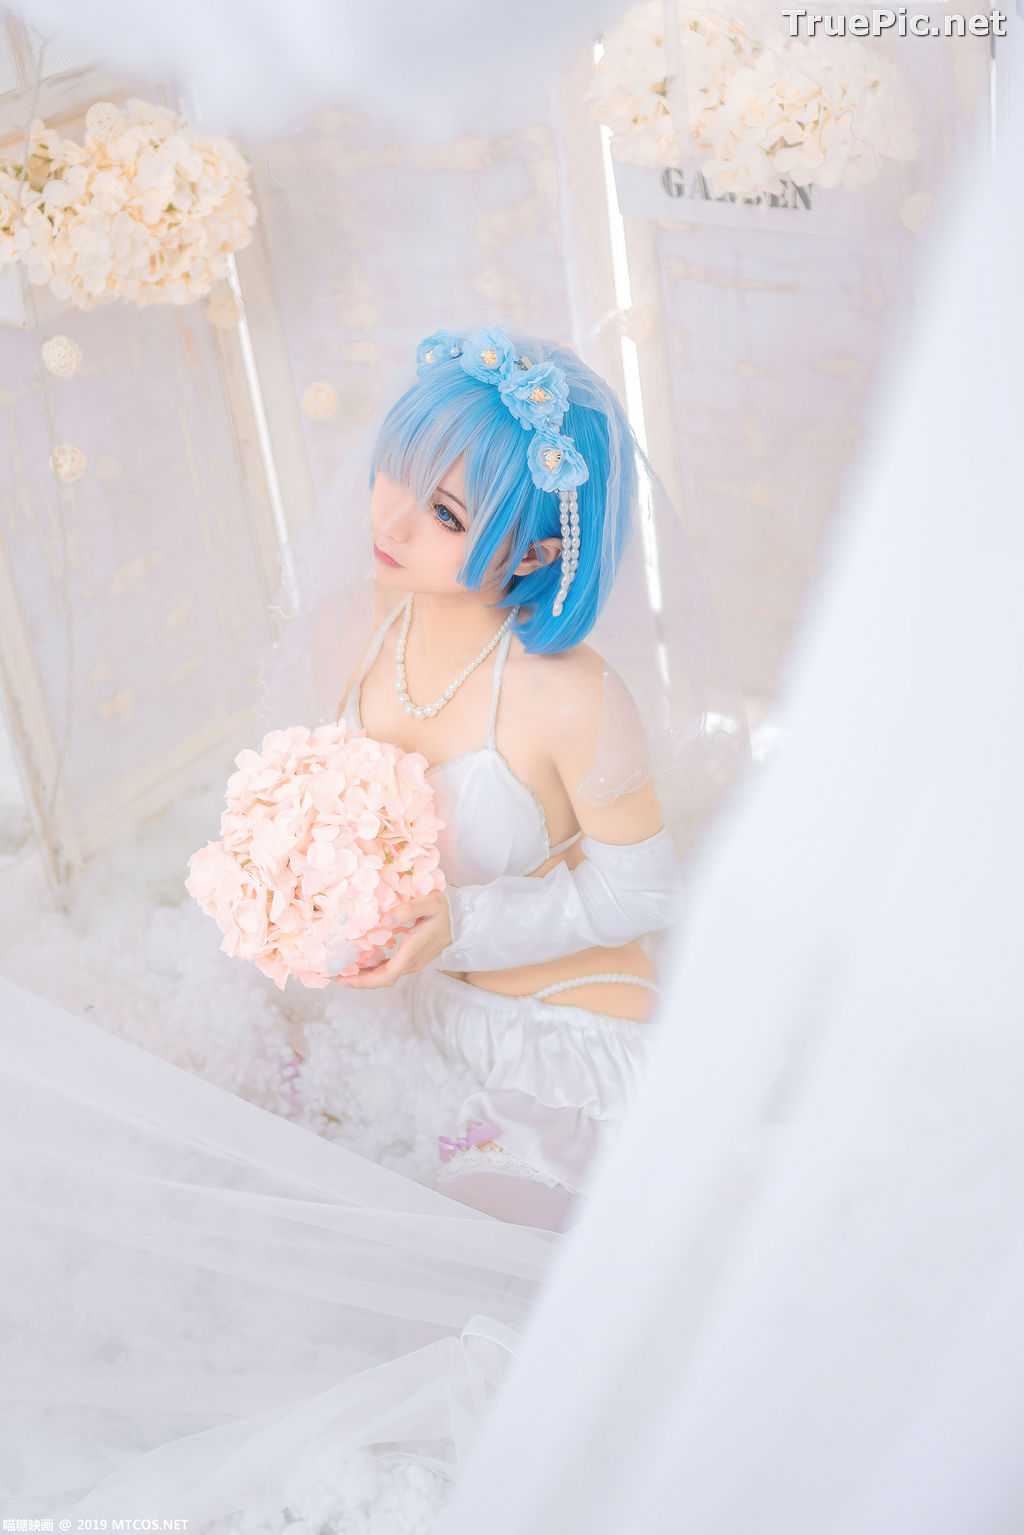 Image [MTCos] 喵糖映画 Vol.029 – Chinese Cute Model – Bride Rem Cosplay - TruePic.net - Picture-22